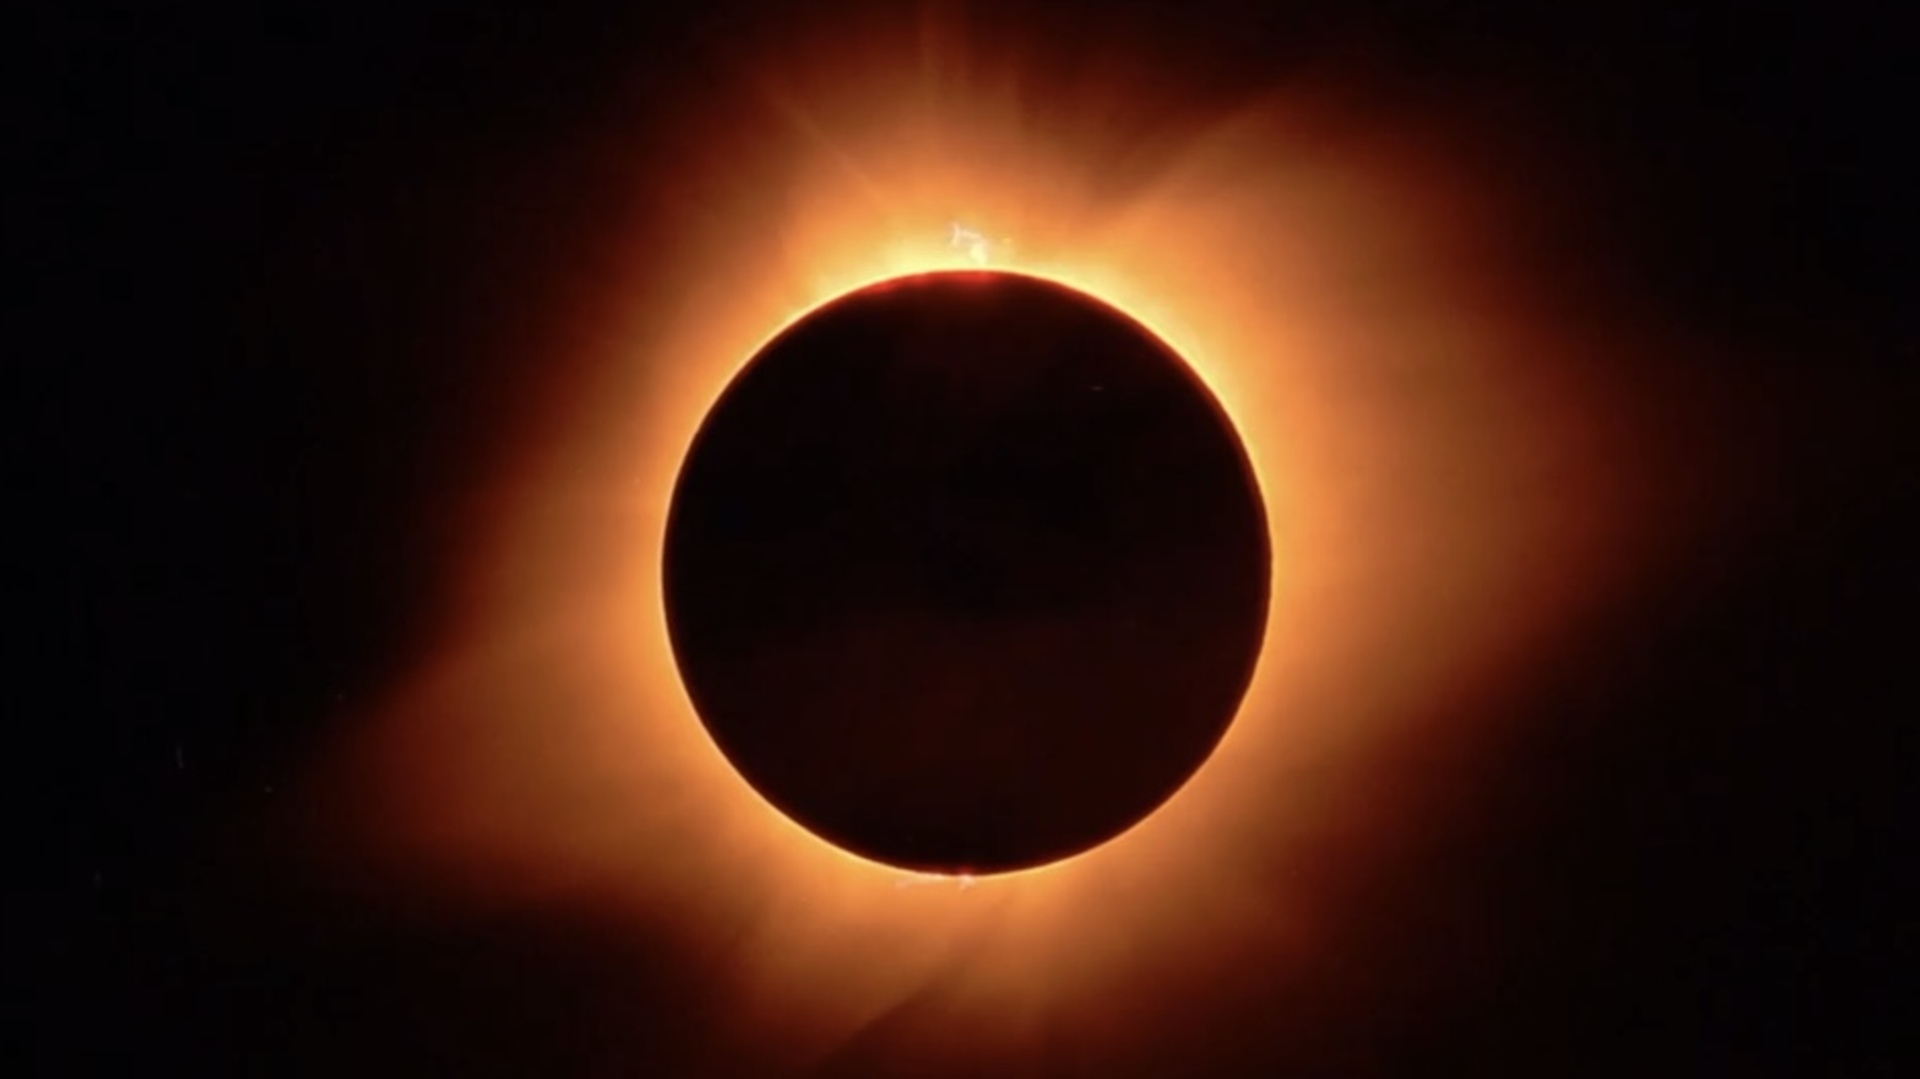 What the solar eclipse represents for Indigenous communities